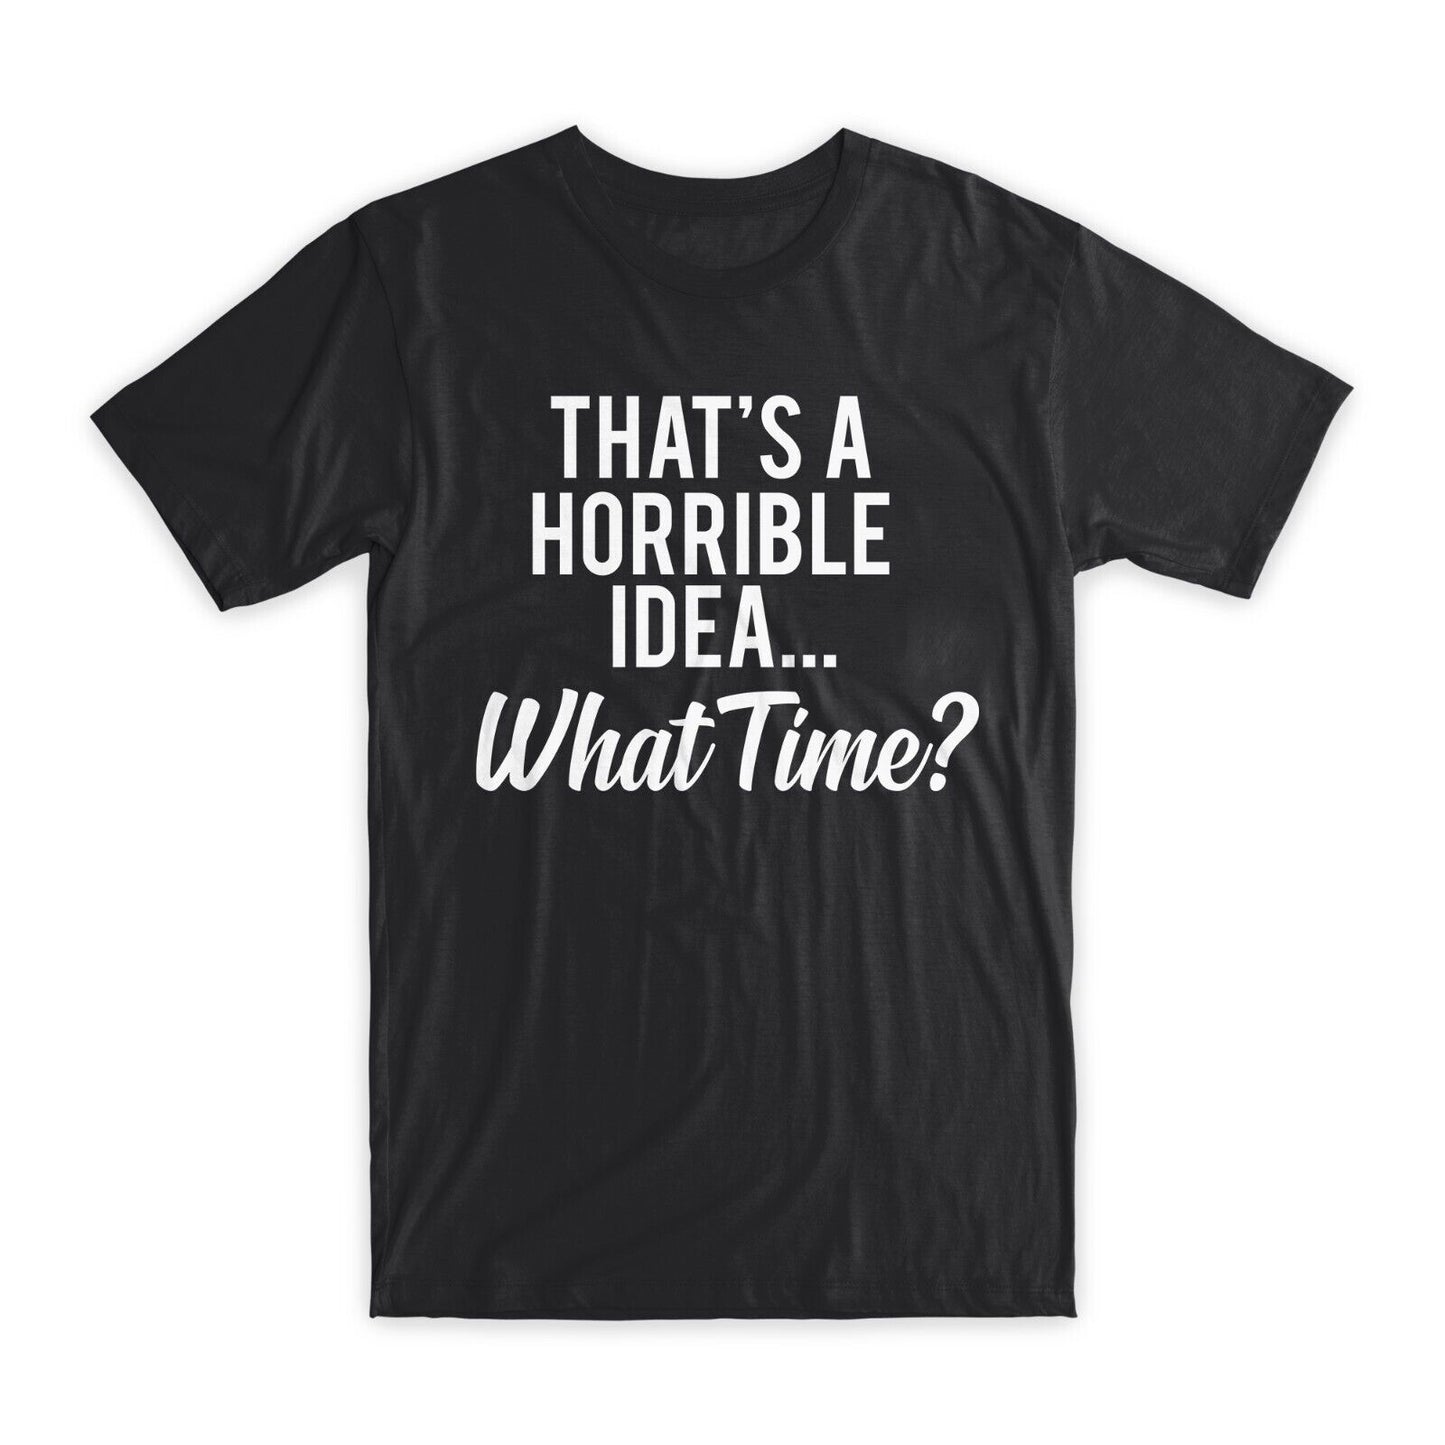 That's A Horrible Idea What Time T-Shirt Premium Soft Cotton Funny Tees Gift NEW